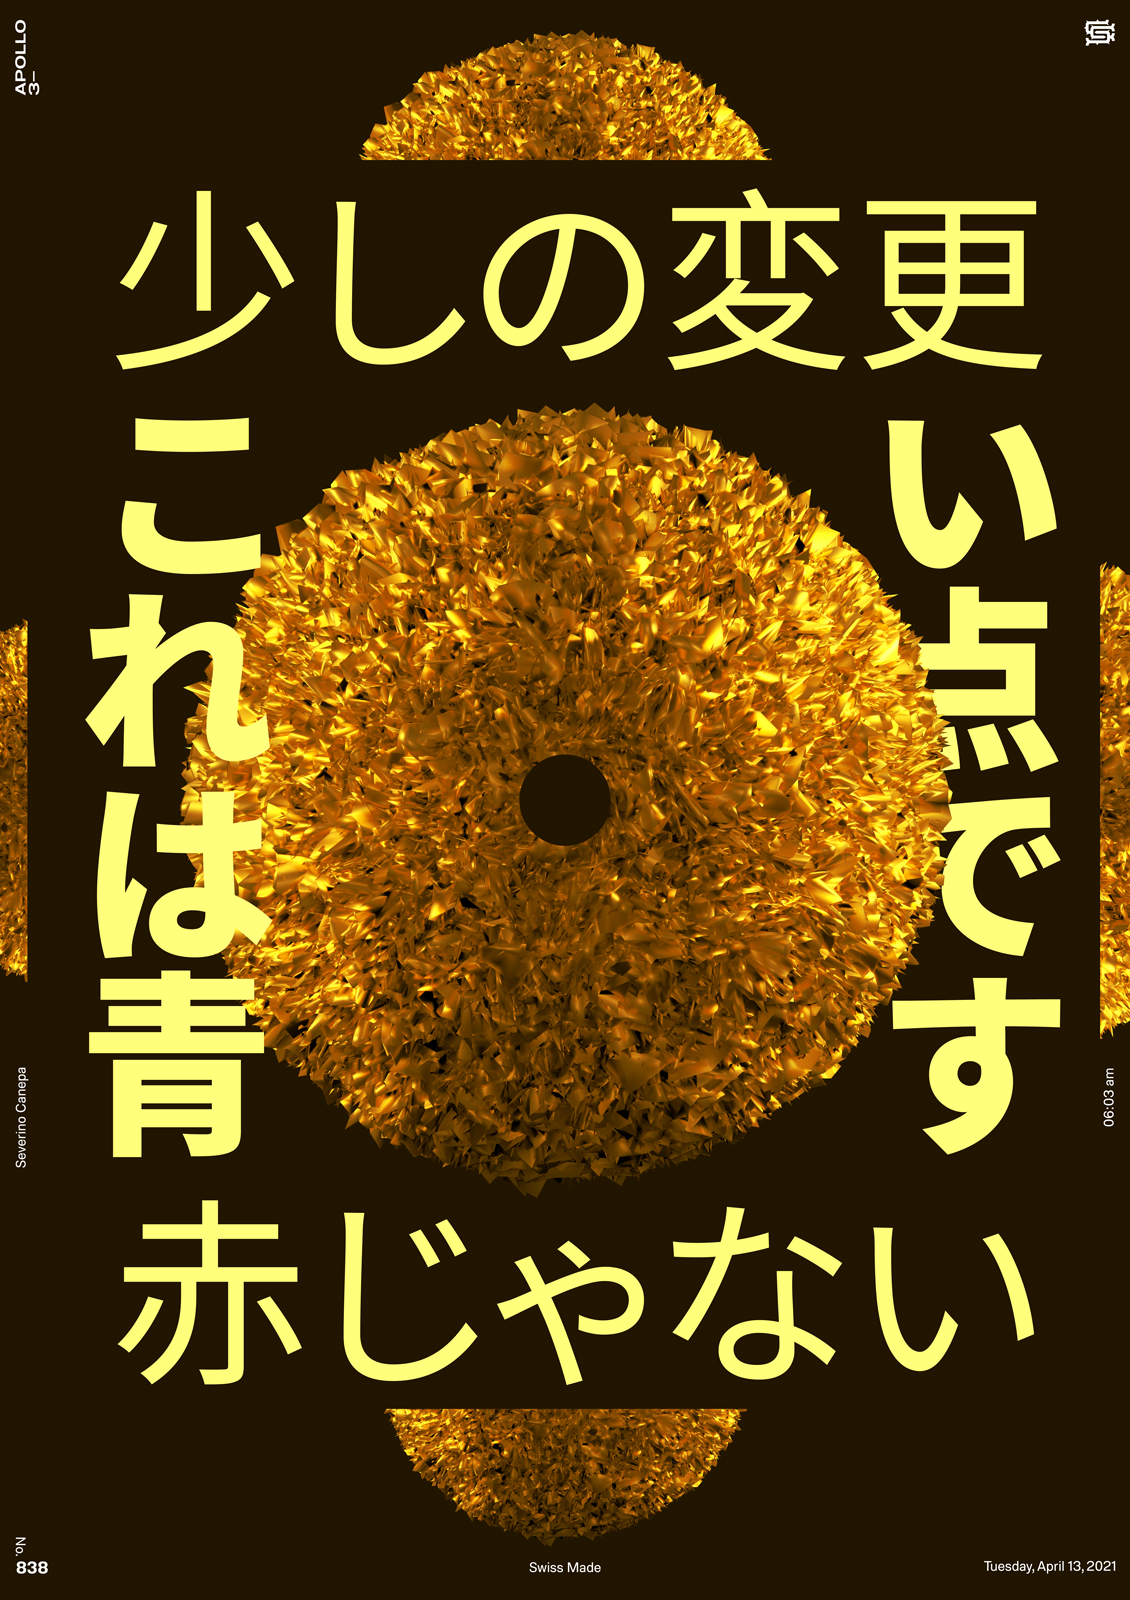 Minimalist composition I create with Japnese fonts and the Circular shape